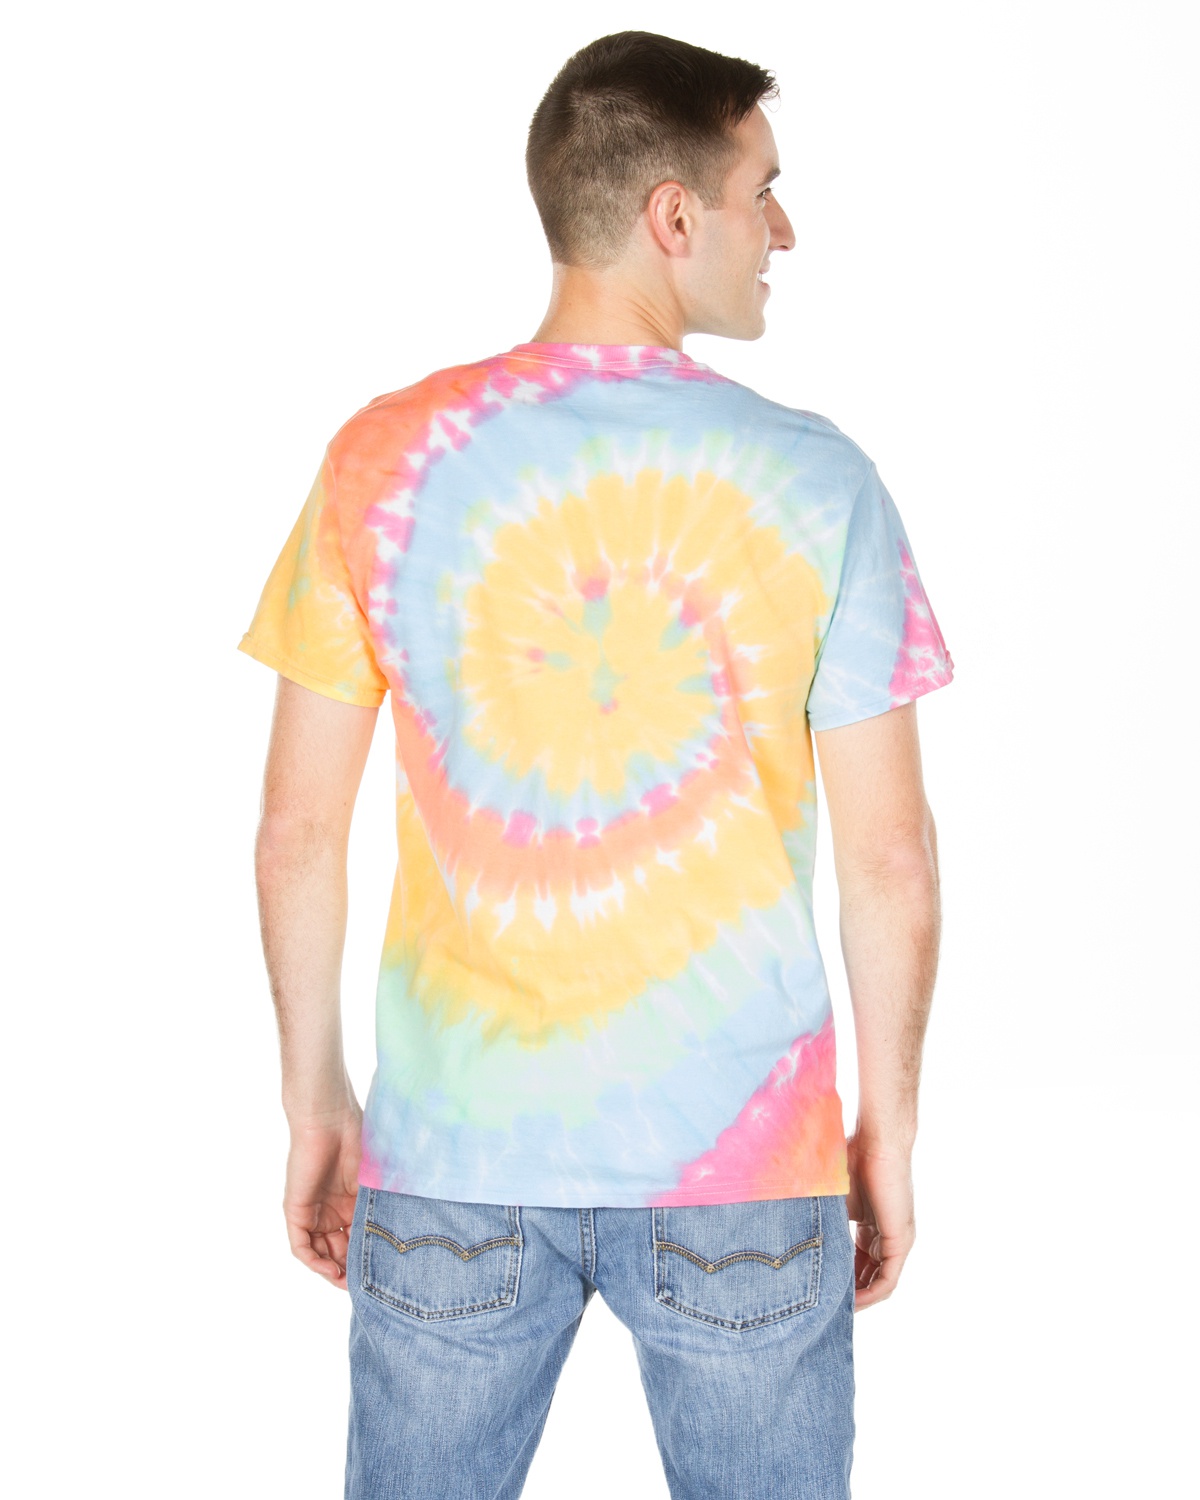 'Dyenomite 200MS Multi-Color Spiral Short Sleeve T-Shirt'